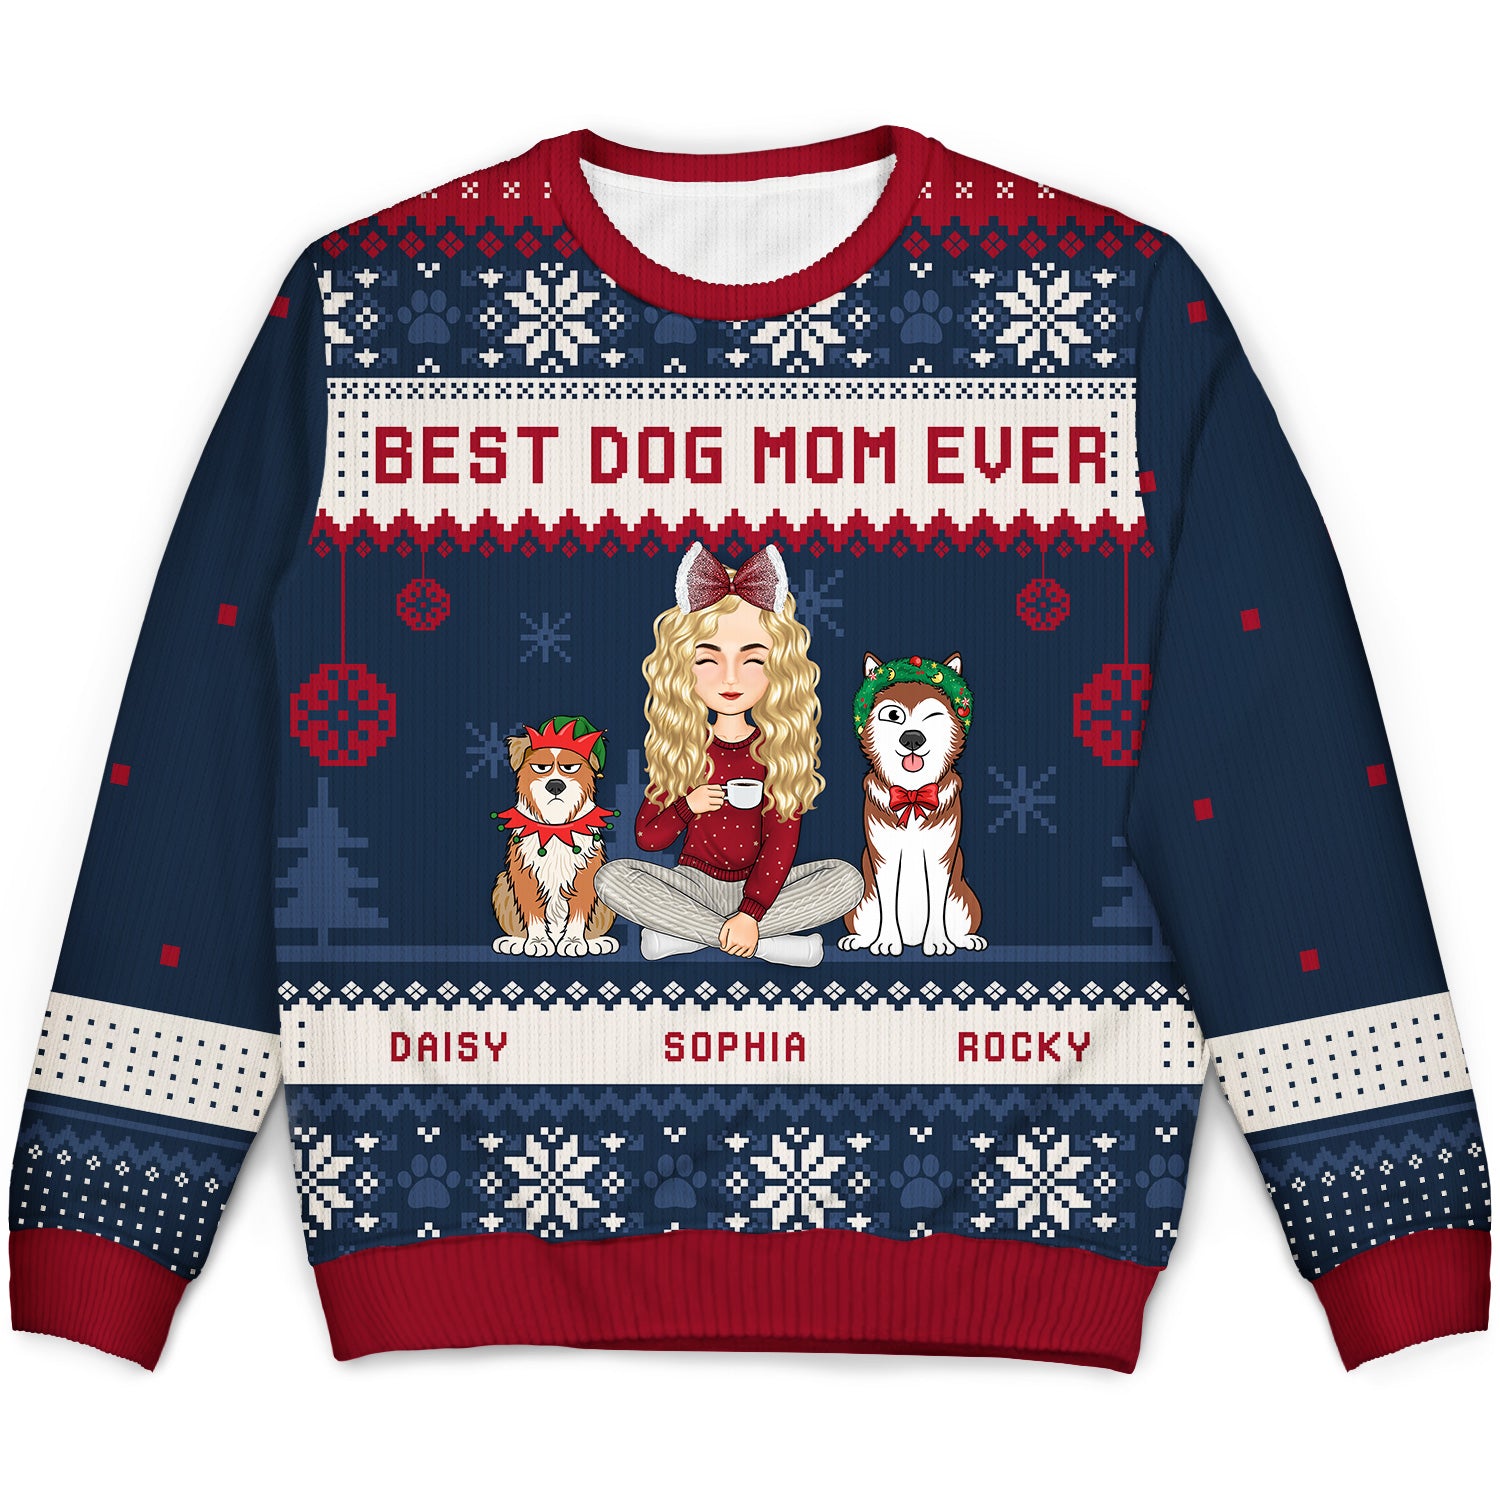 Best Dog Mom Ever Cartoon Style - Christmas Gift For Dog Lovers - Personalized Unisex Ugly Sweater